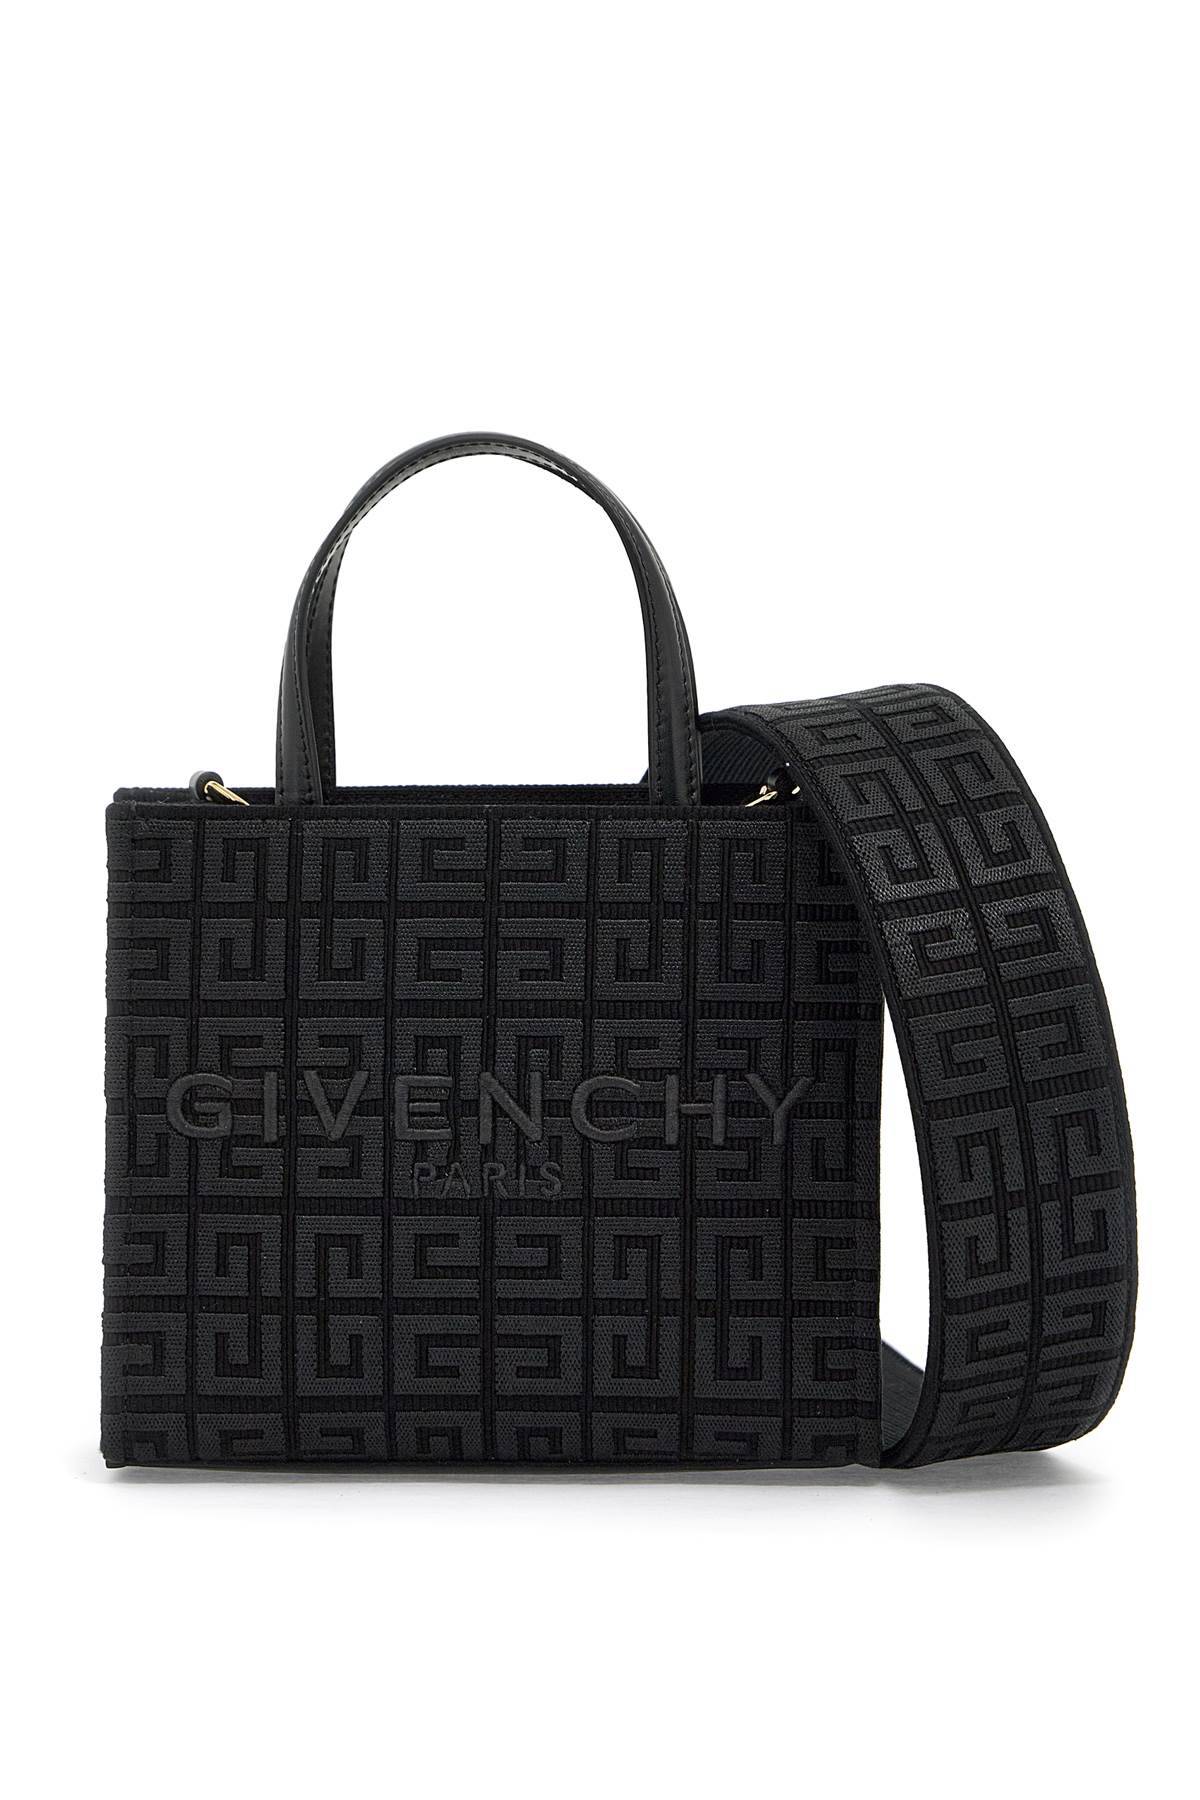 Givenchy GIVENCHY mini g tote bag with embroid